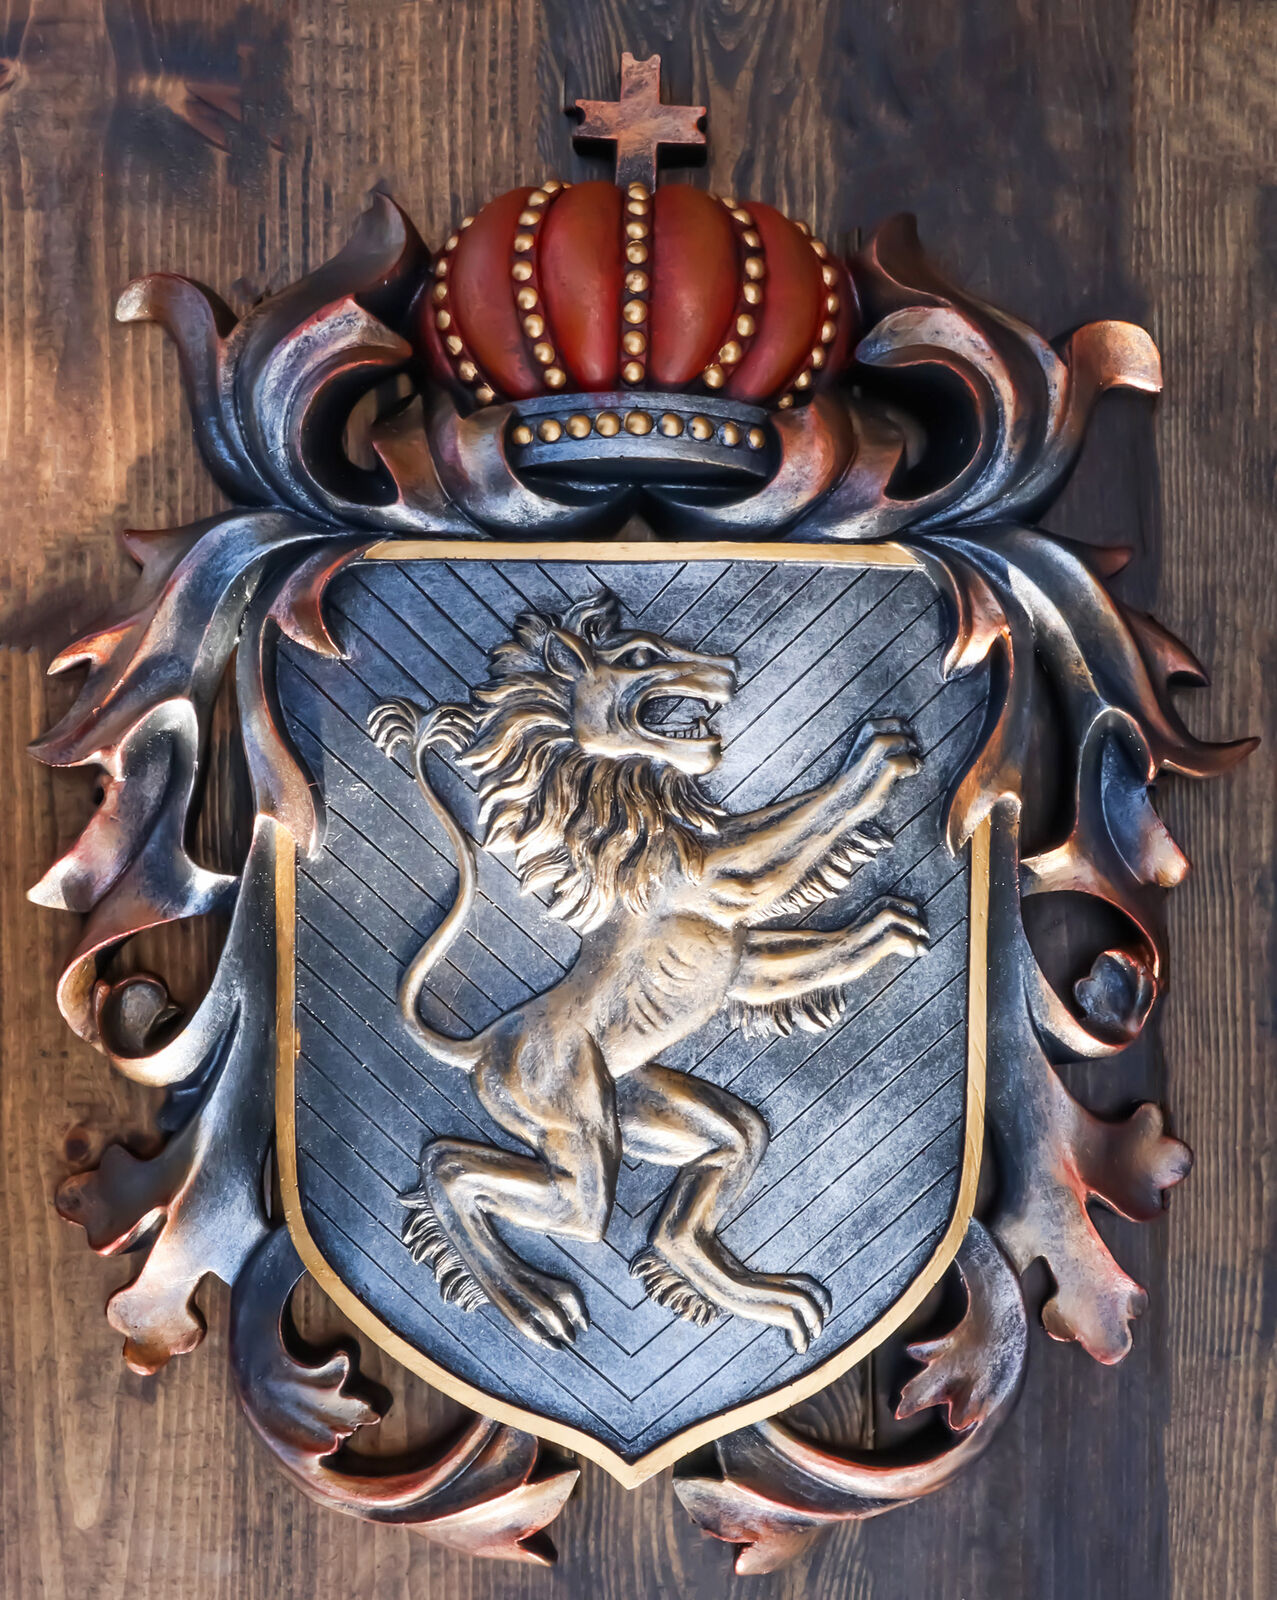 Ebros Large Medieval Heraldic Royal Lion Coat of Arms King Crown Shield Plaque